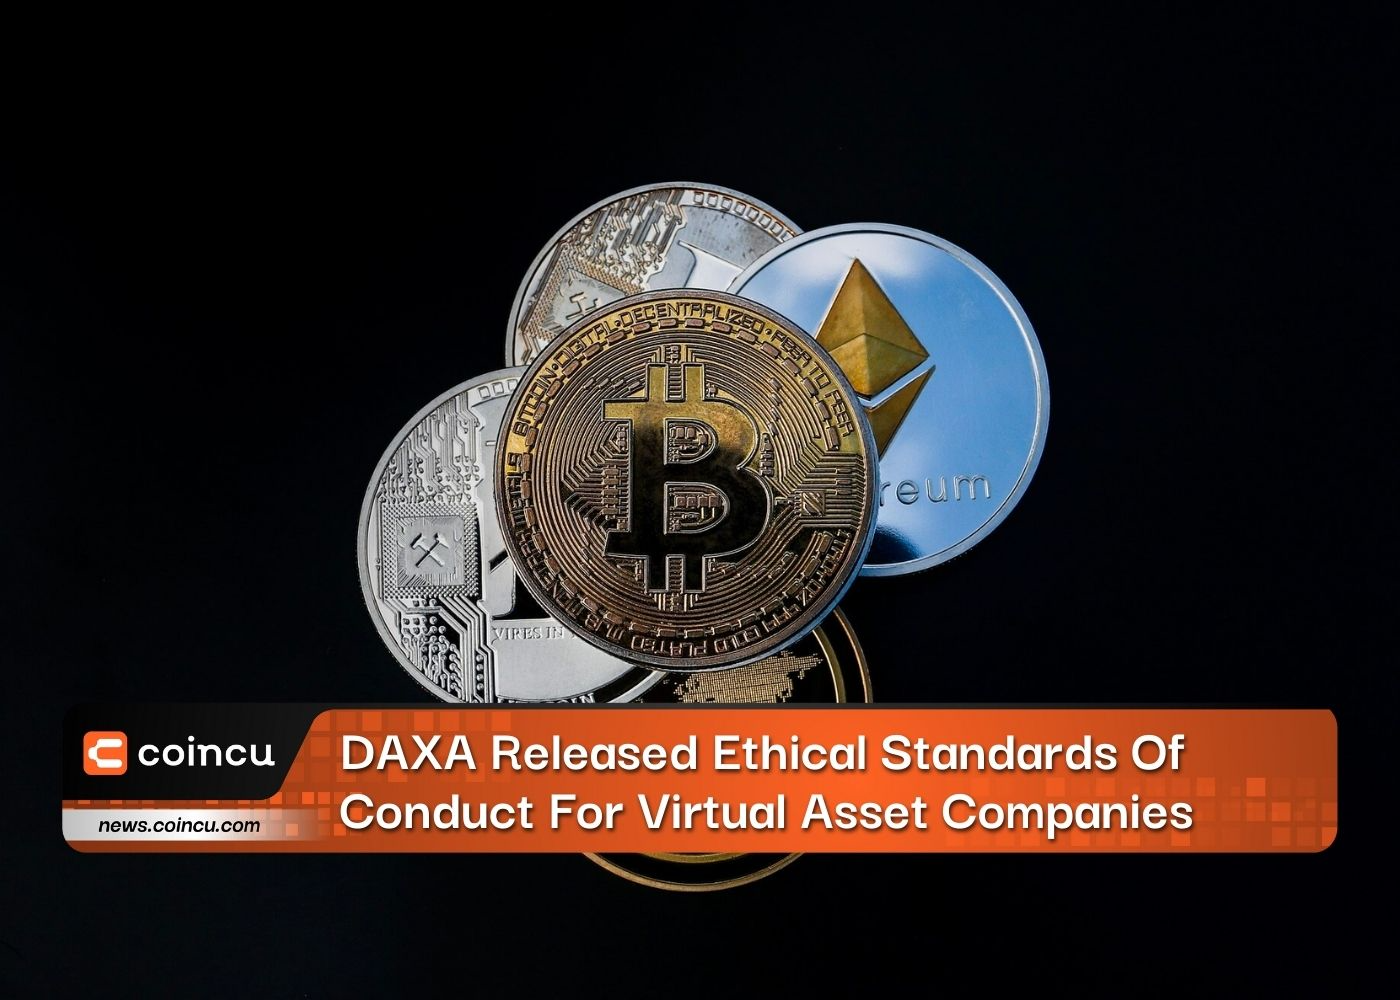 DAXA Released Ethical Standards Of Conduct For Virtual Asset Companies